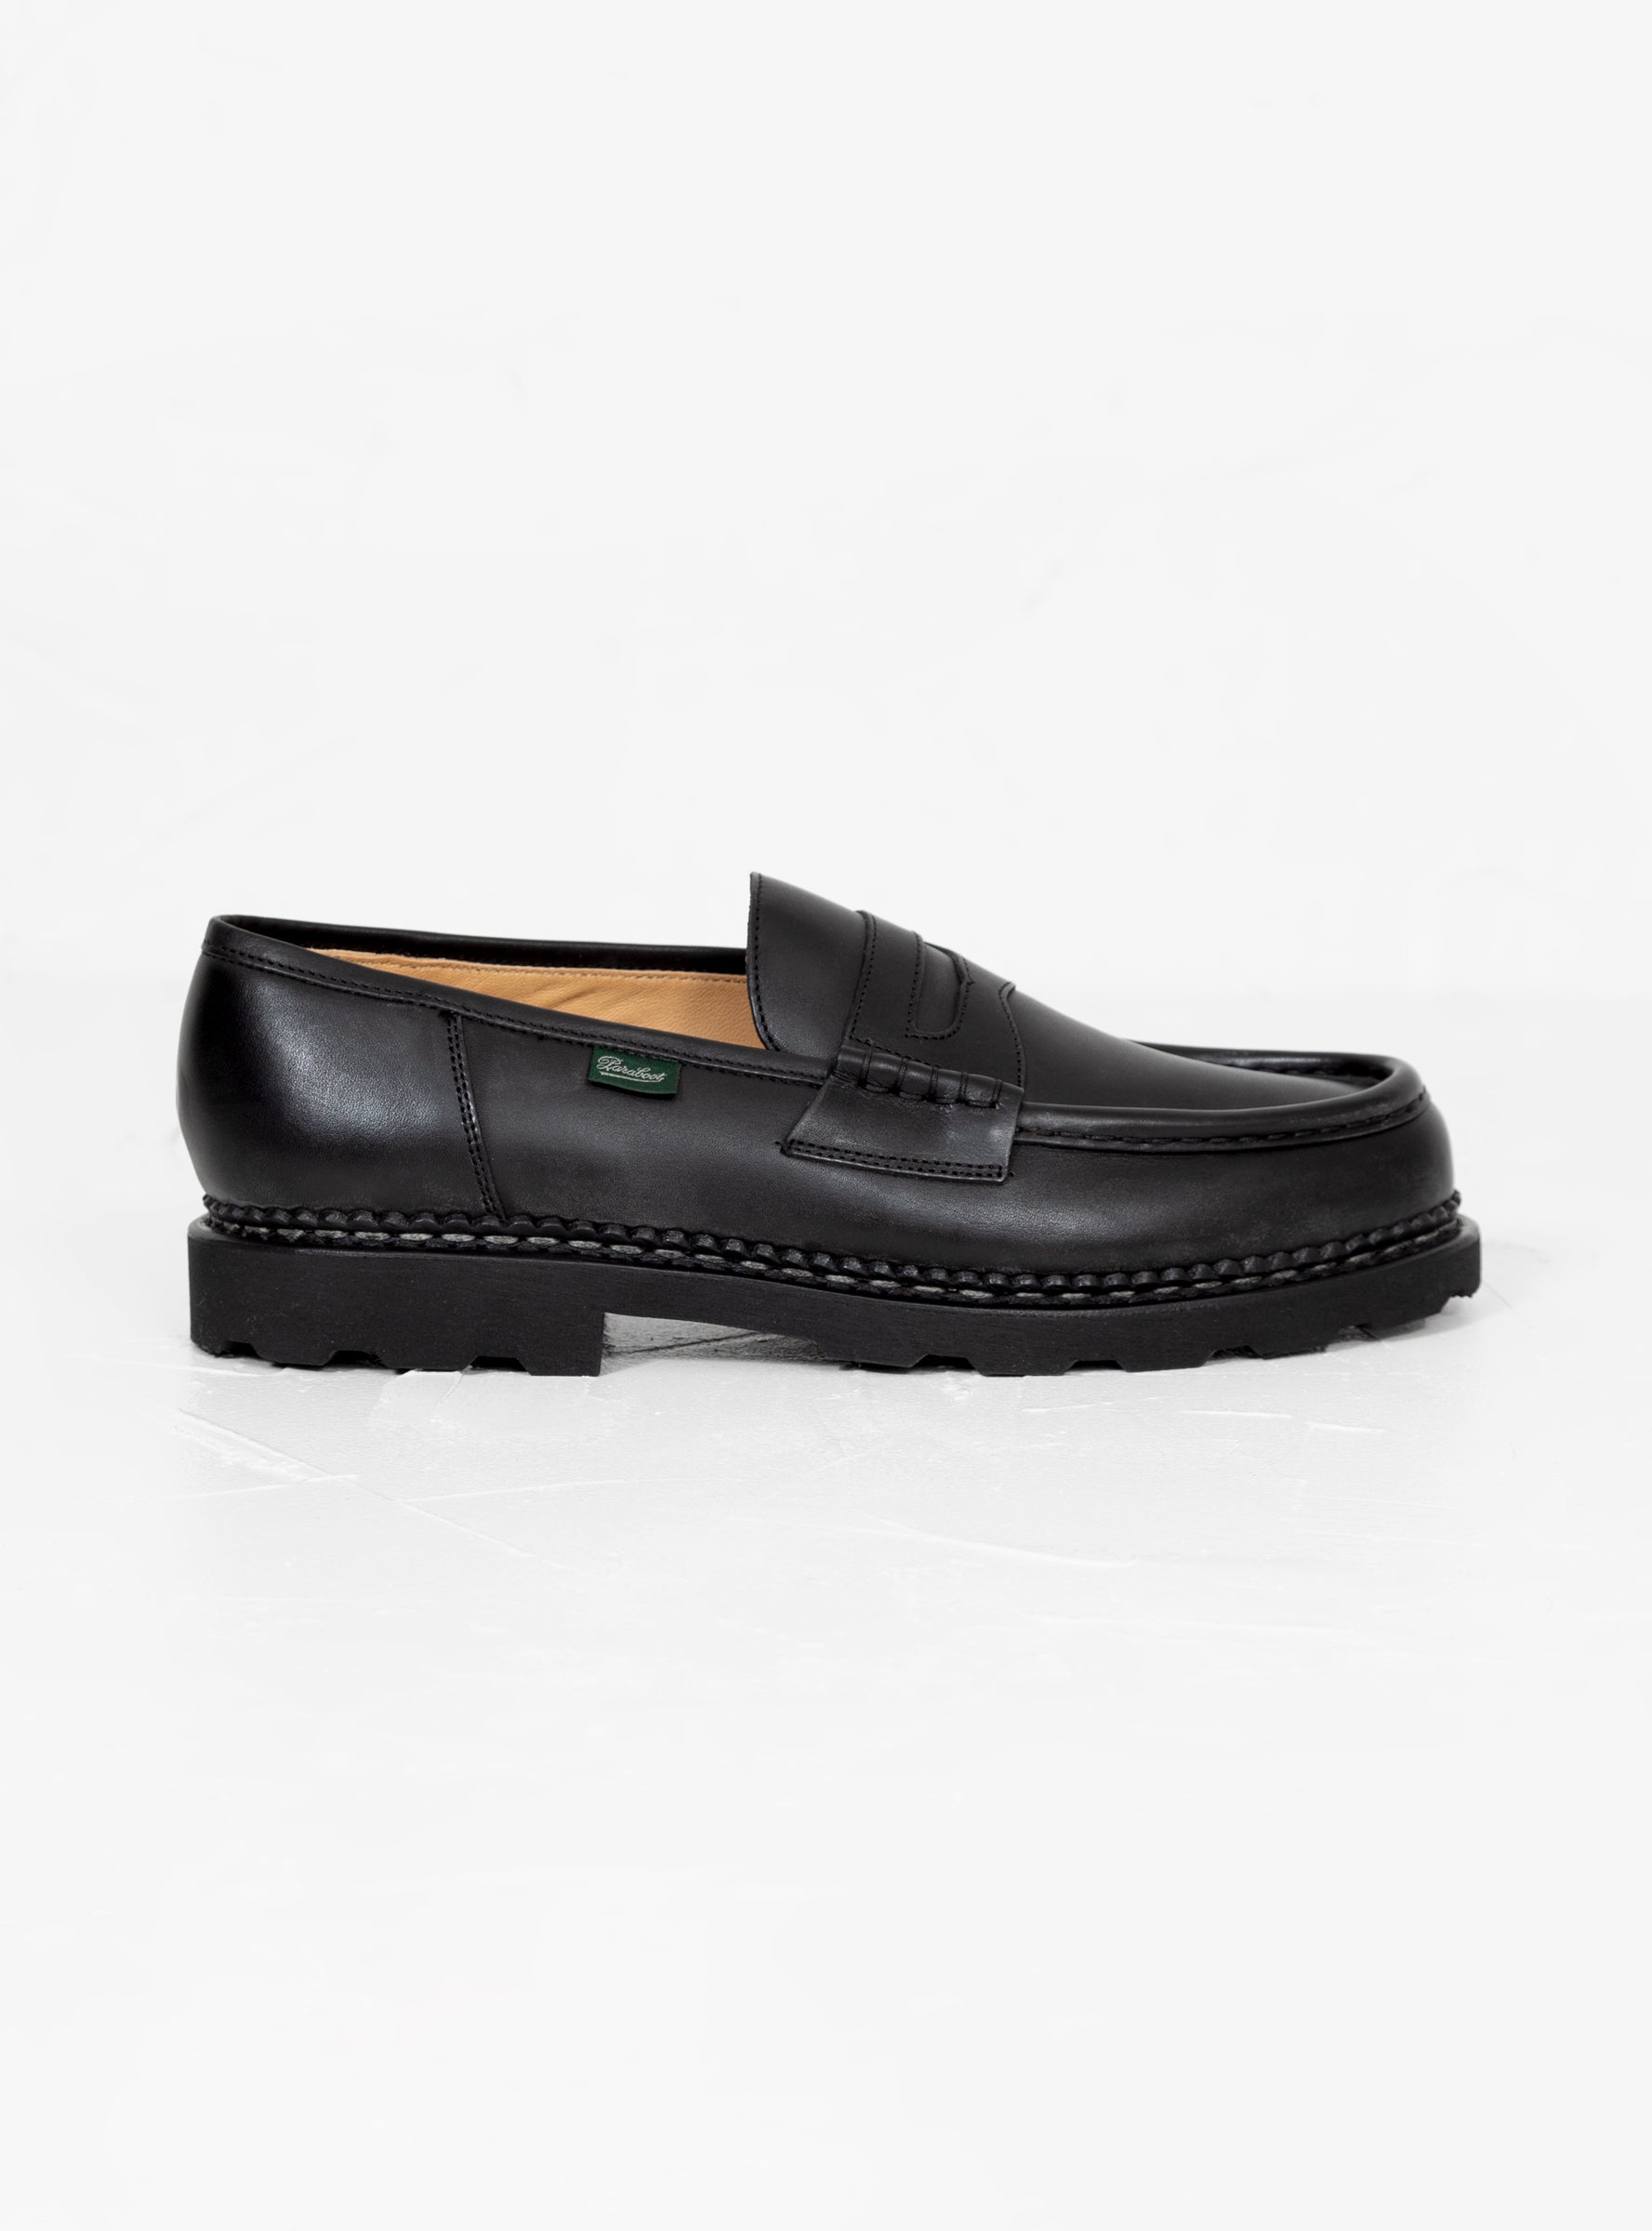 Paraboot Paraboot Reims Leather Loafers Black - Size: UK 10